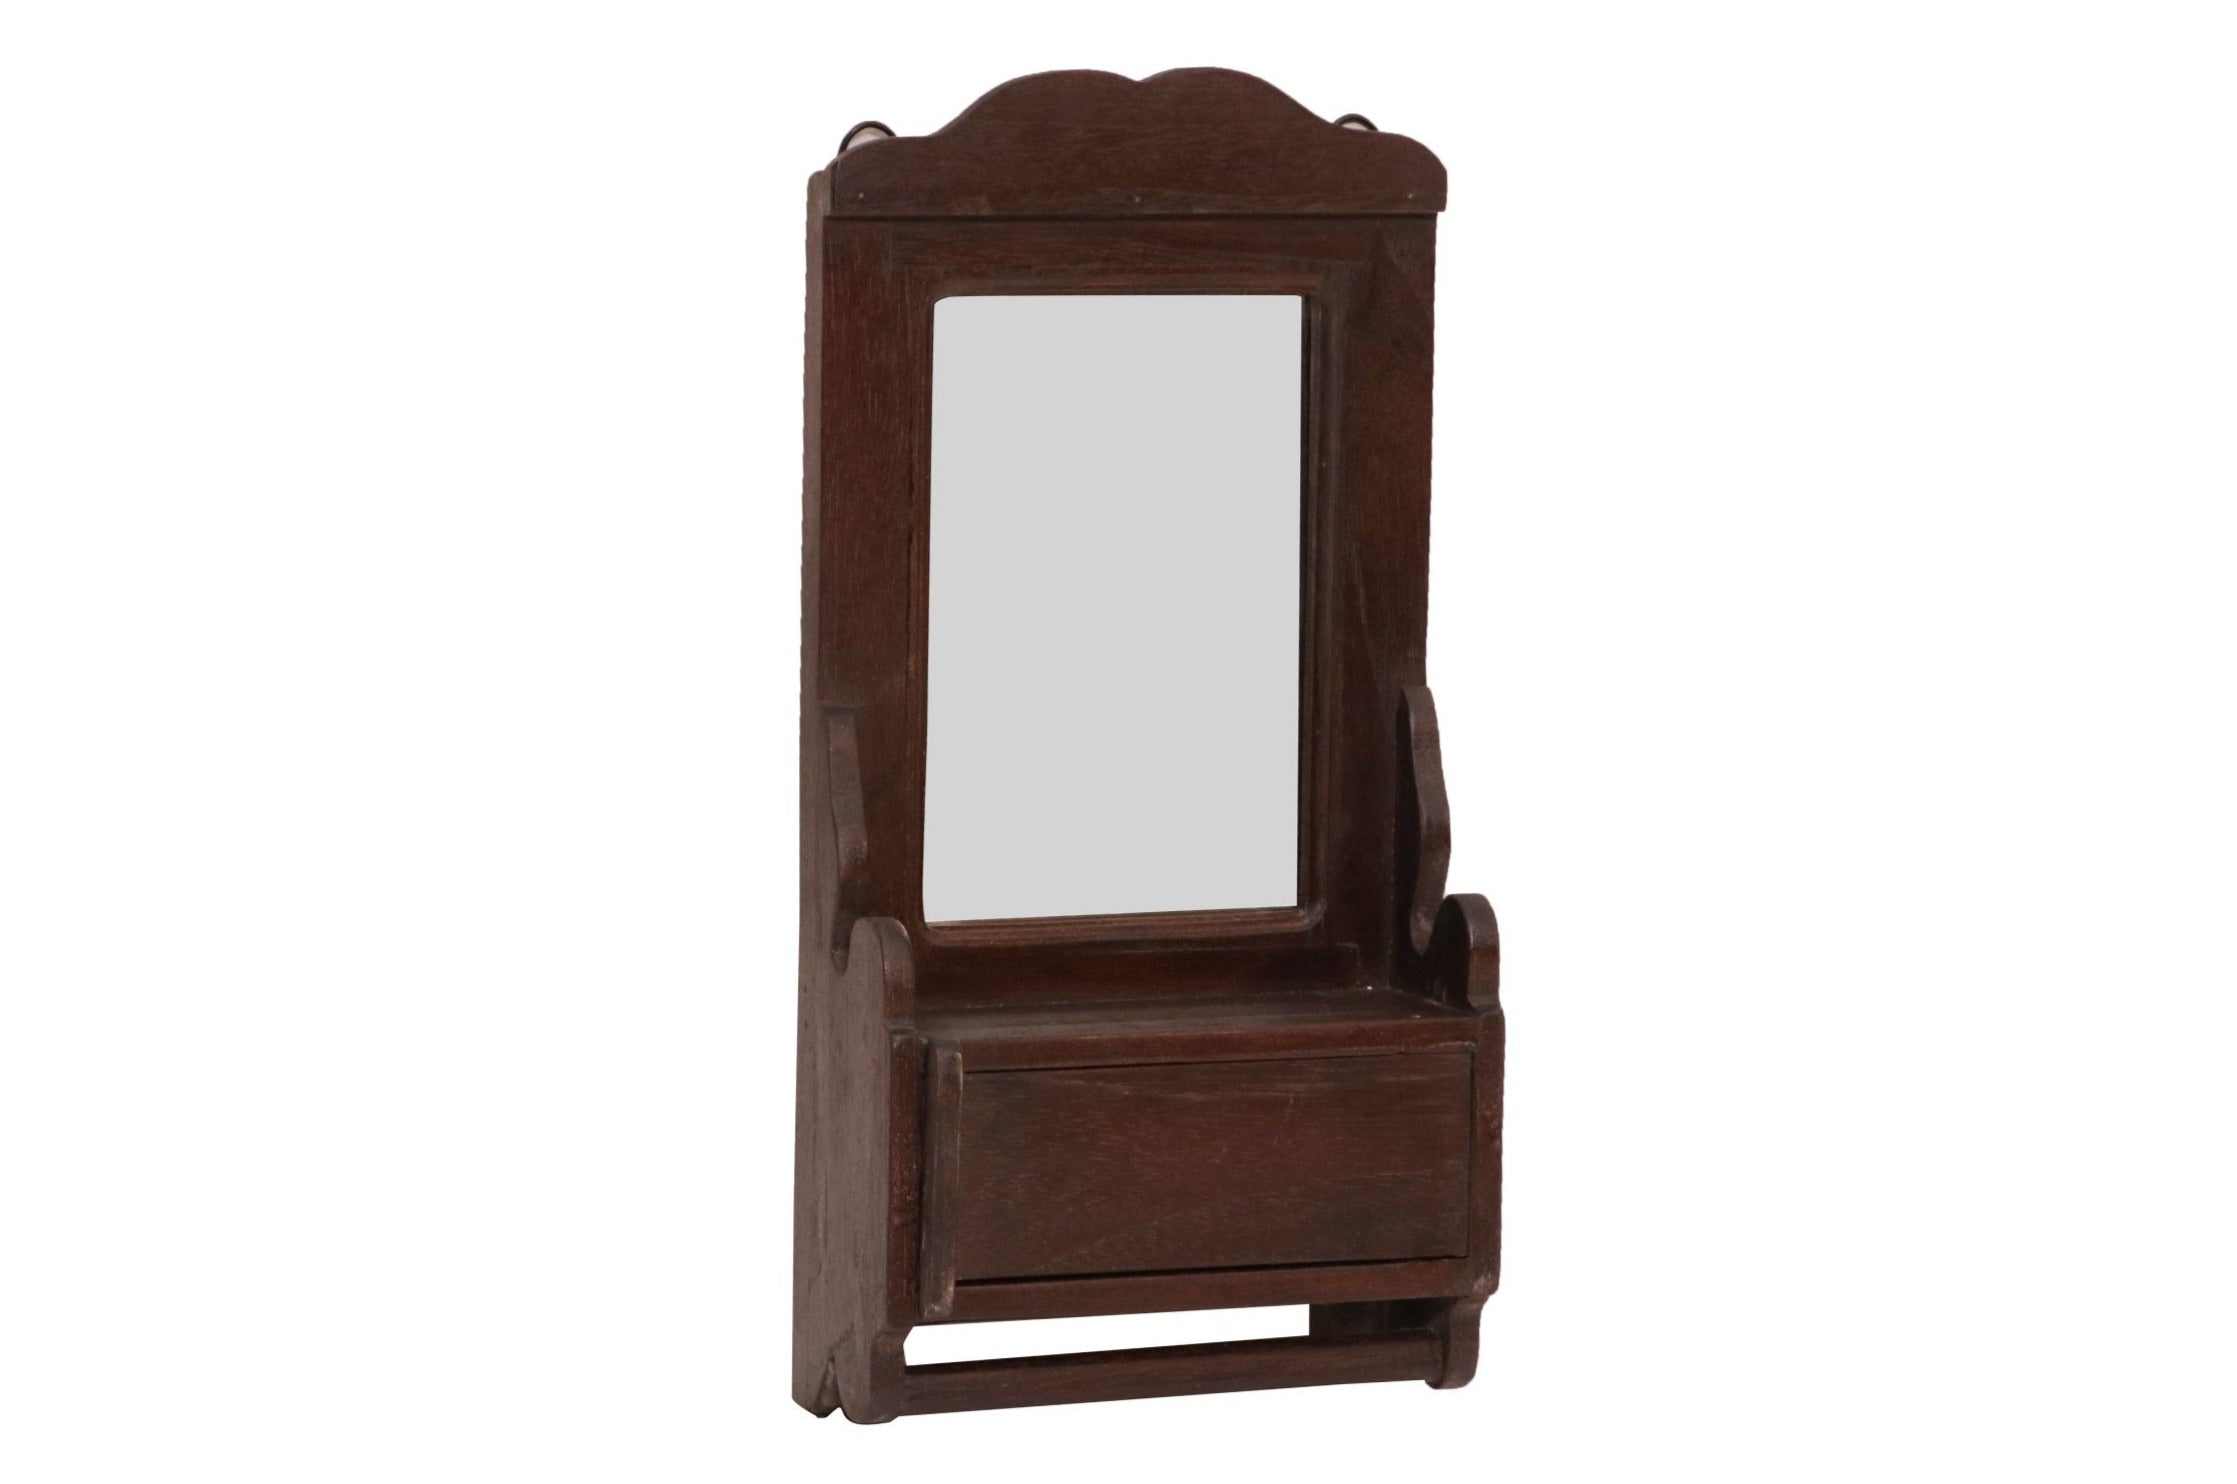 Mirror with a Drawer Mirror